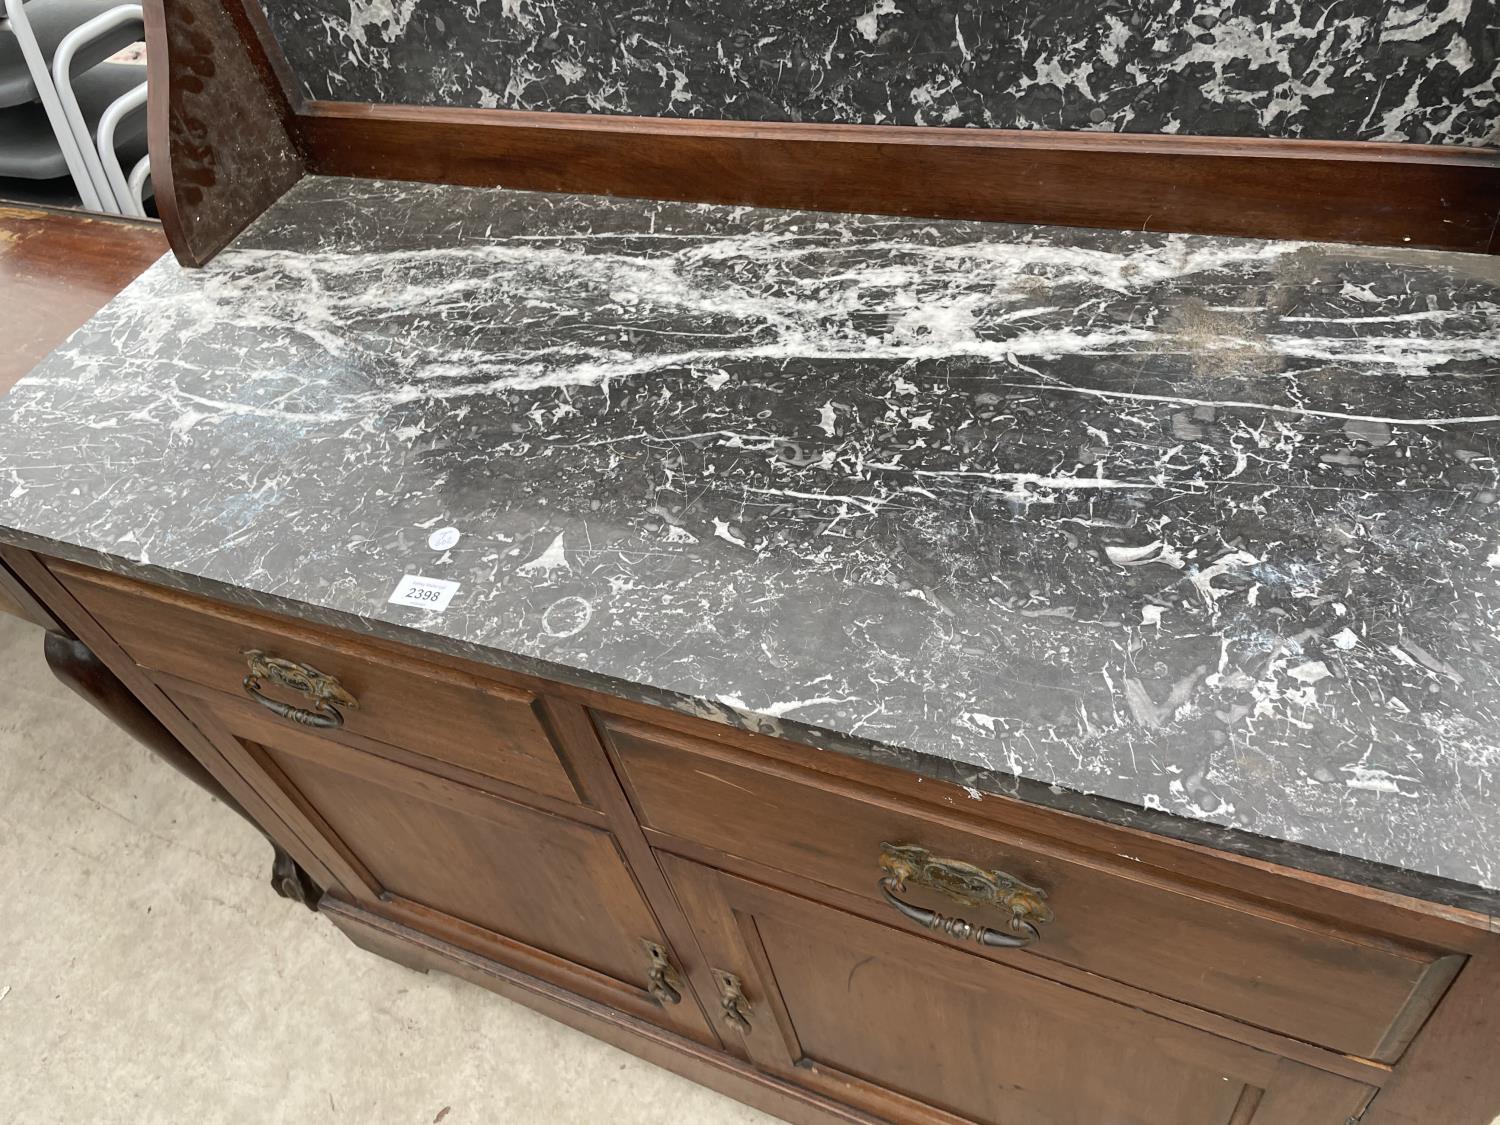 A VICTORIAN MAHOGANY MARBLE TOP WASHSTAND WITH MARBLE BASE, 42" WIDE - Image 3 of 4